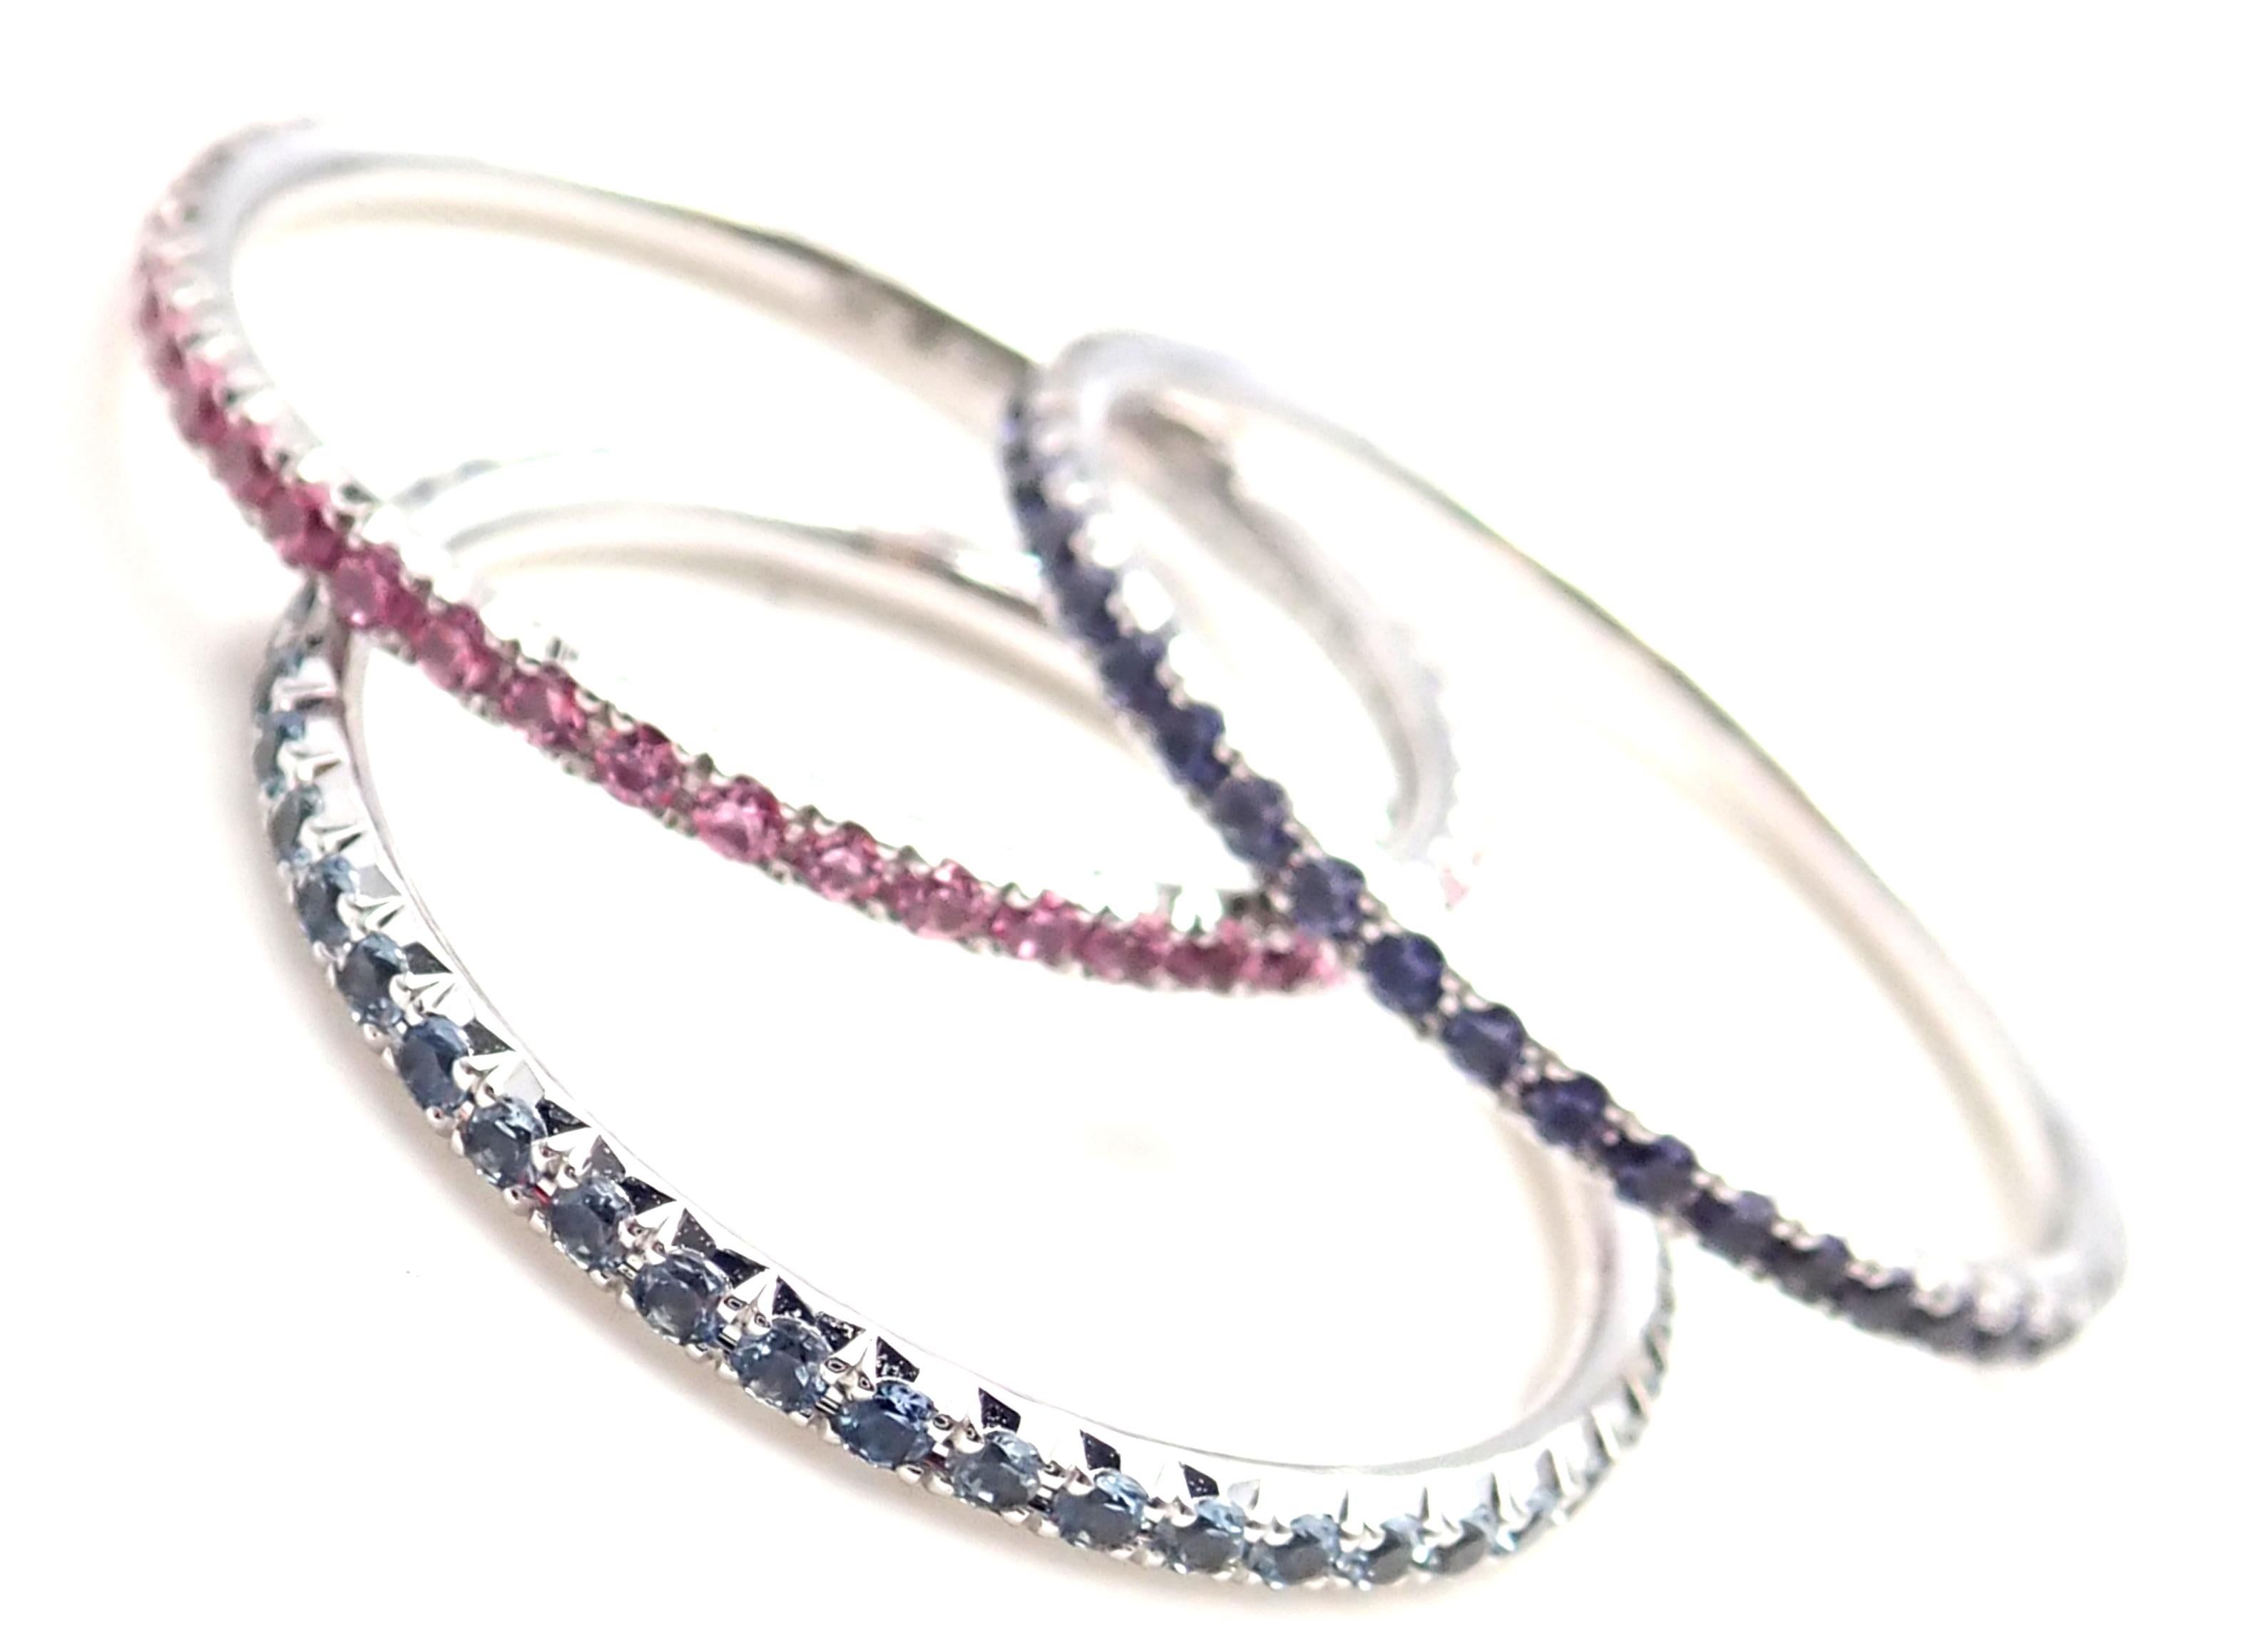 18k White Gold Sapphire Aquamarine Iolite Three Bands Stacking Ring by Tiffany & Co.
With Pink Sapphires total weight approx. .30ct
Iolites total weight approx. .30ct
Aquamarines total weight approx. .30ct
Measurements: 
Ring Size: 9
Weight: All